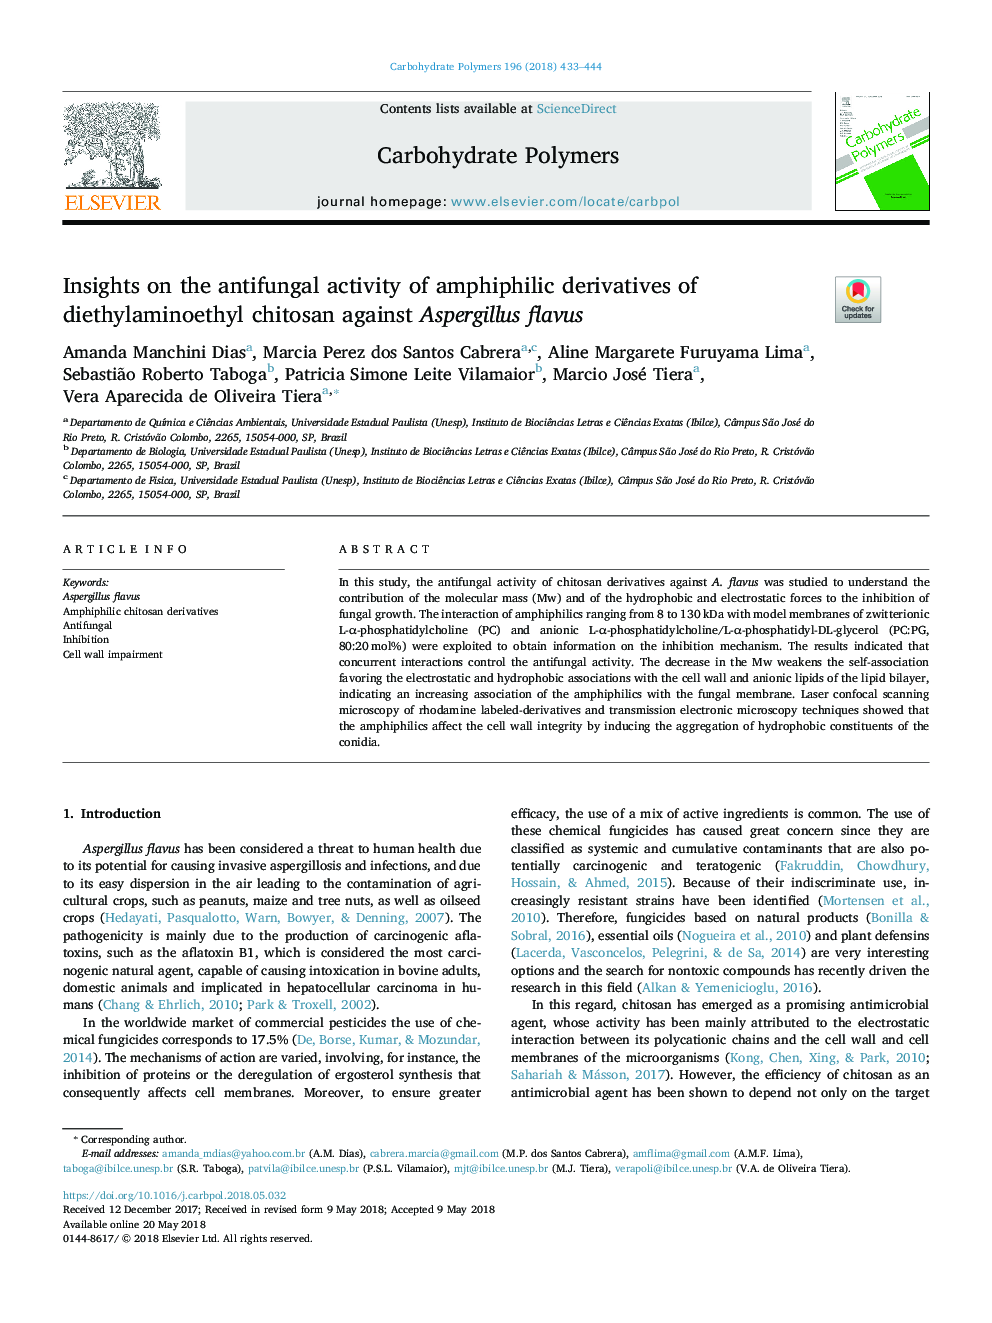 Insights on the antifungal activity of amphiphilic derivatives of diethylaminoethyl chitosan against Aspergillus flavus